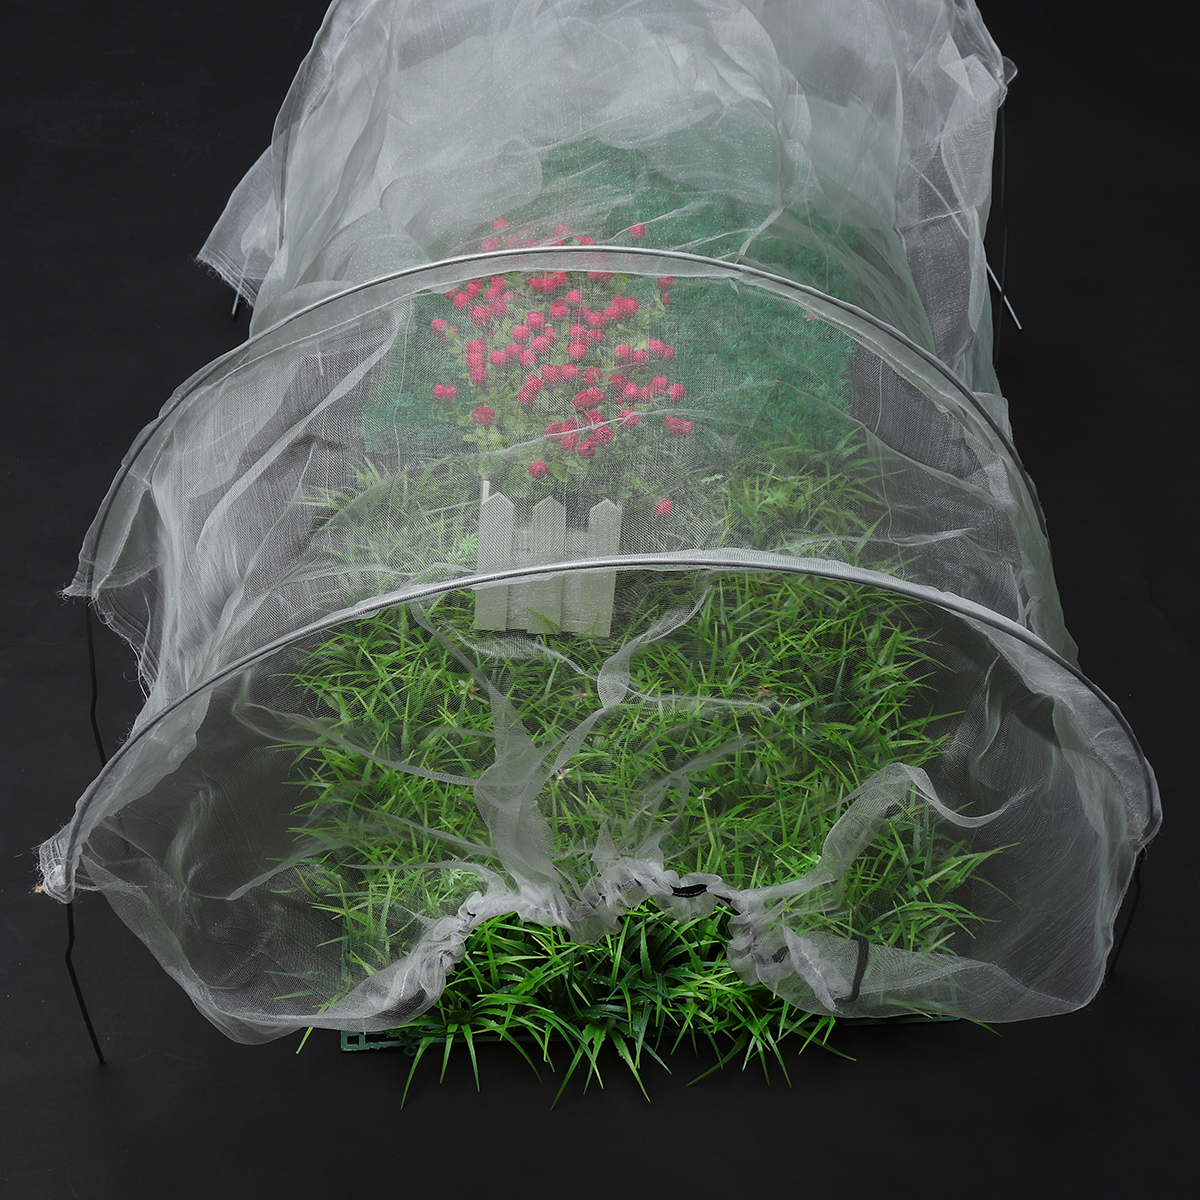 Find Plant Net Shade Insect Bird Barrier Netting Garden Greenhouse Cover Protect Mesh for Sale on Gipsybee.com with cryptocurrencies